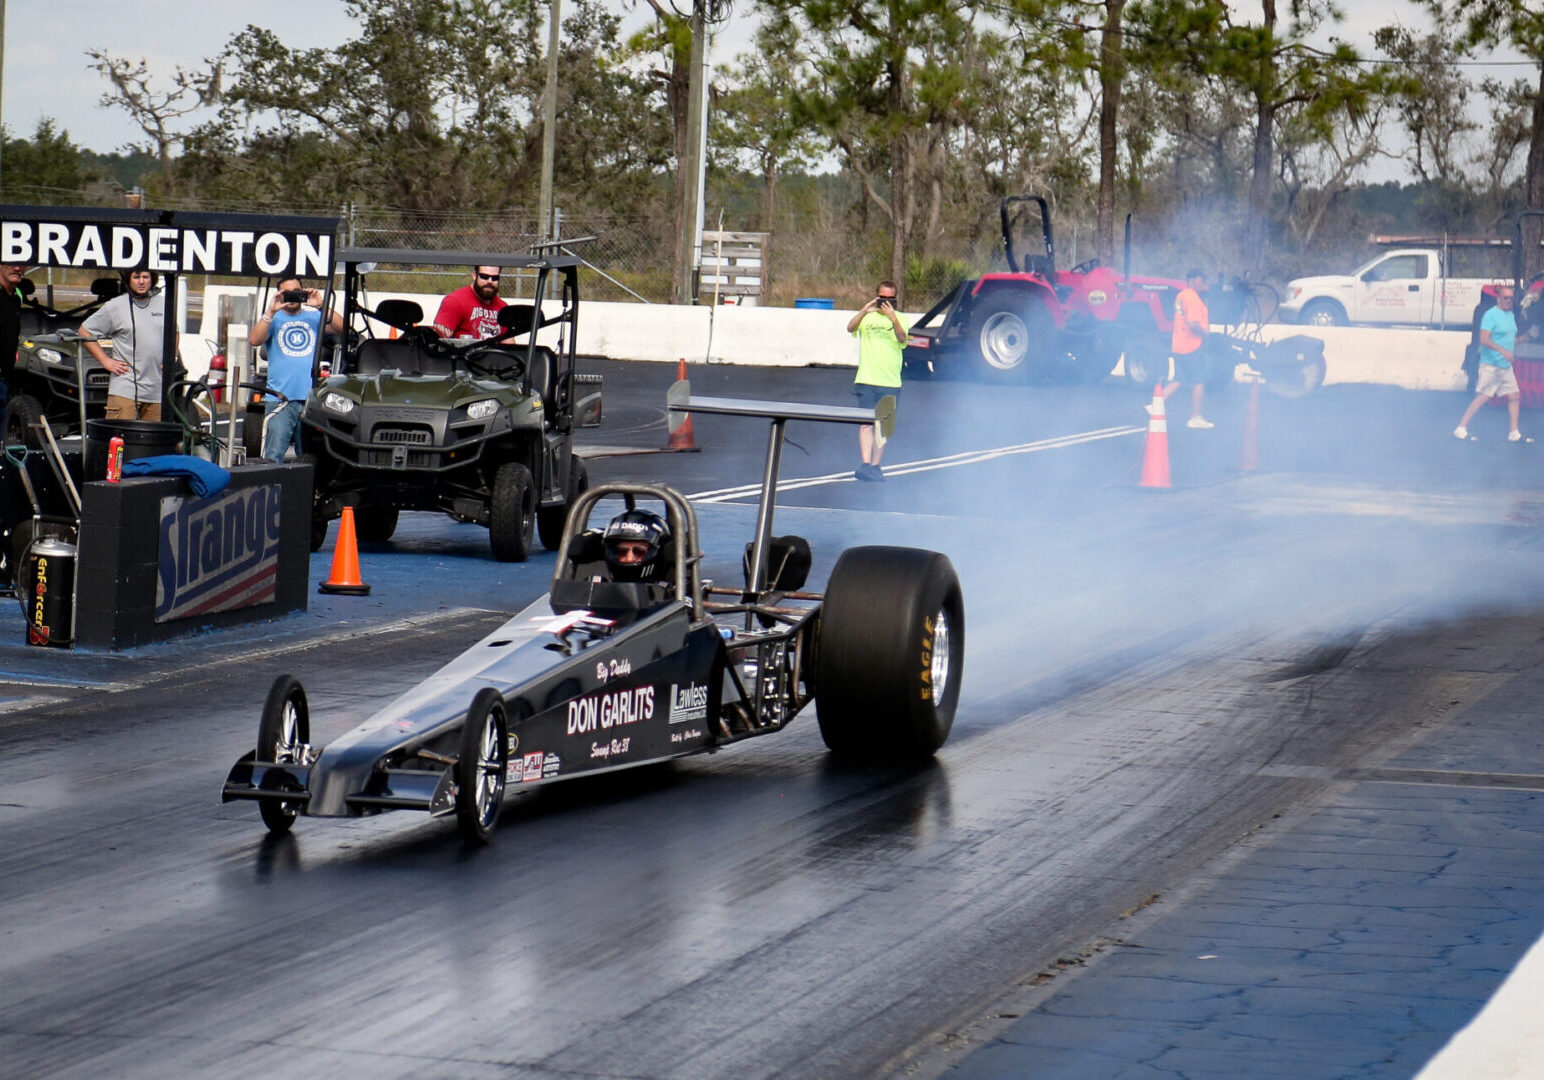 A man participating in drag racing, driving a drag car on a track.